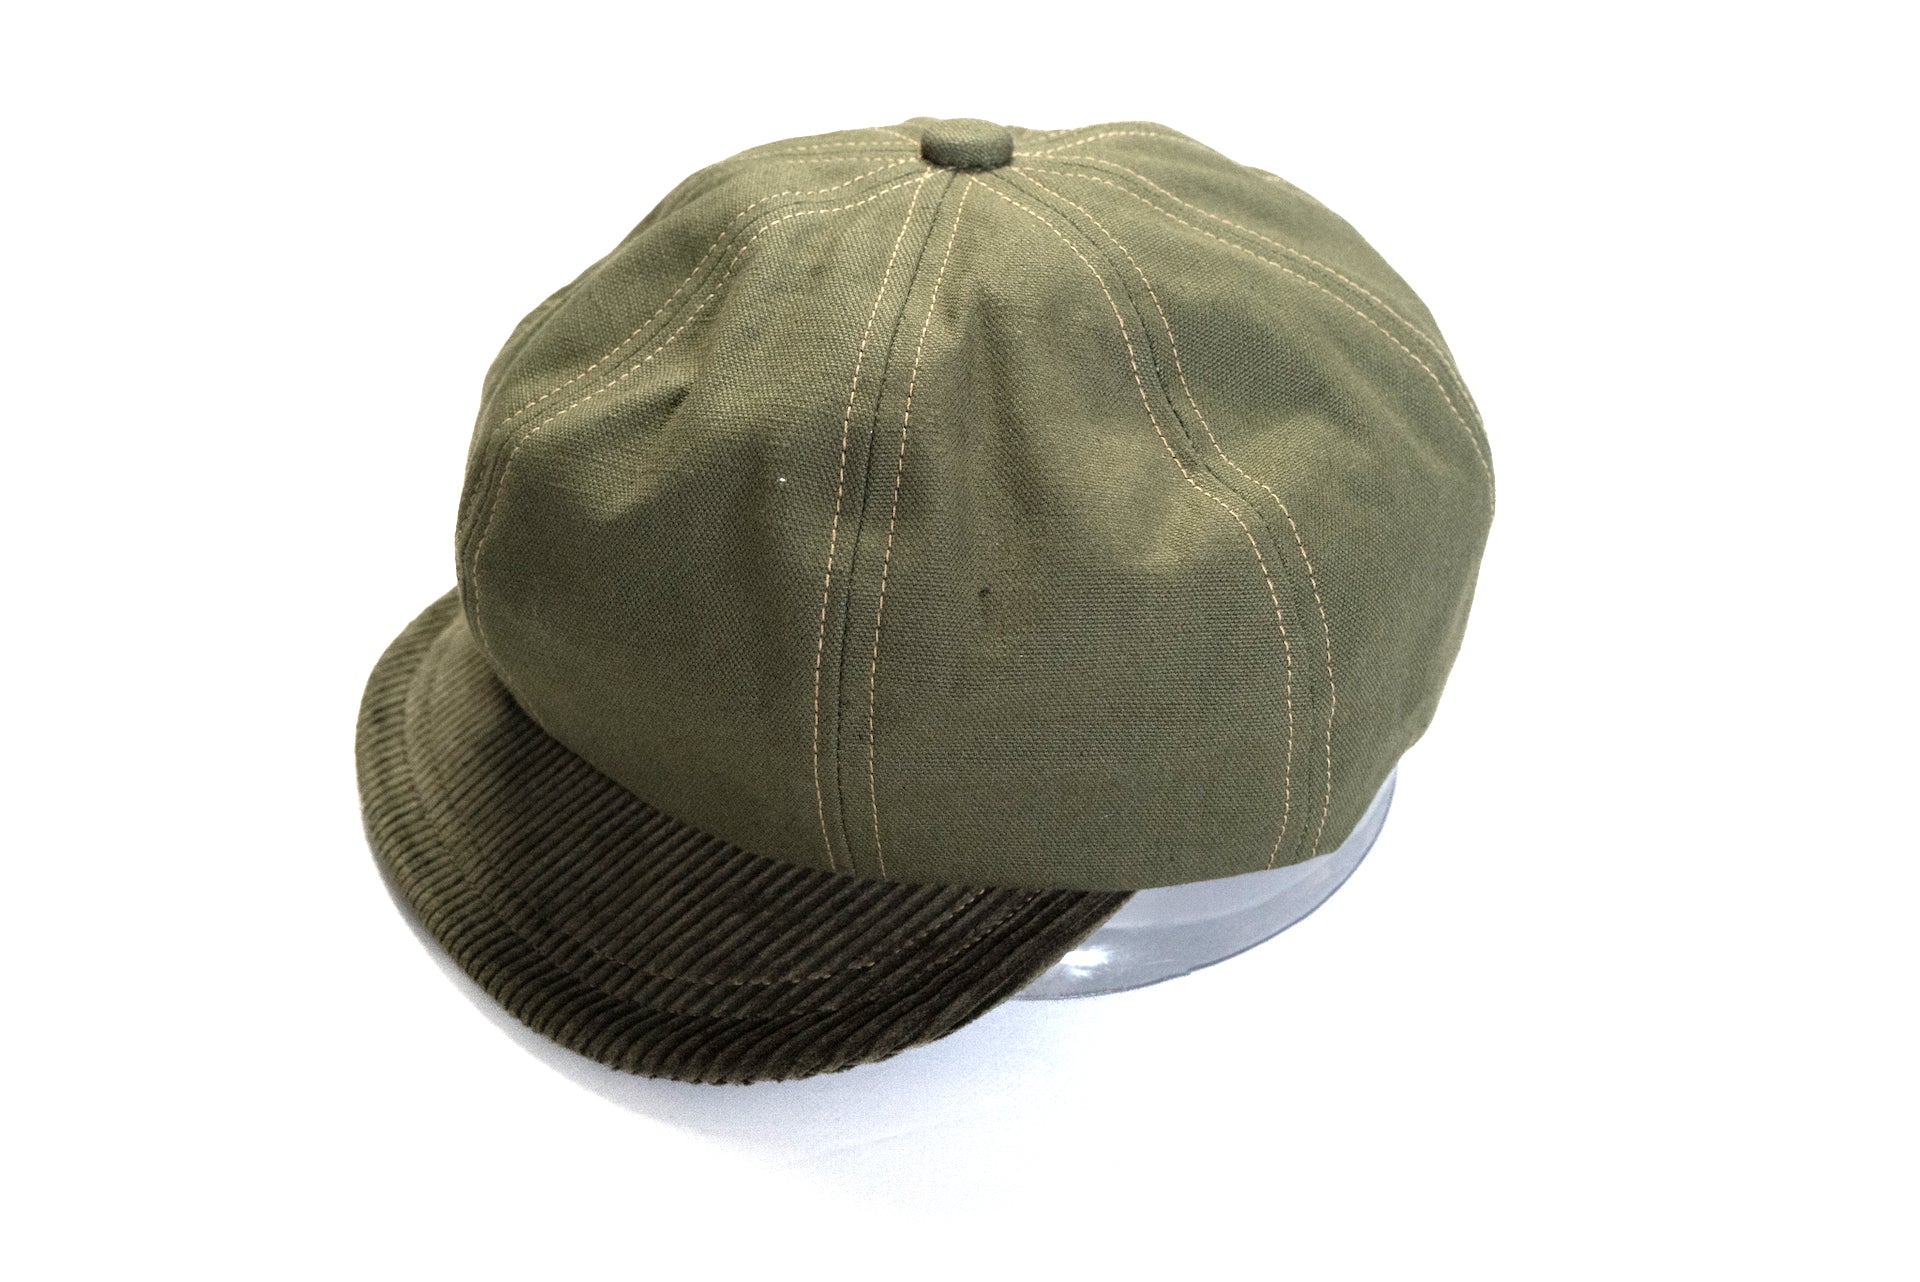 Freewheelers Heavy Drill & Corduroy "Jam Buster" Cap (Olive X Forest Green)